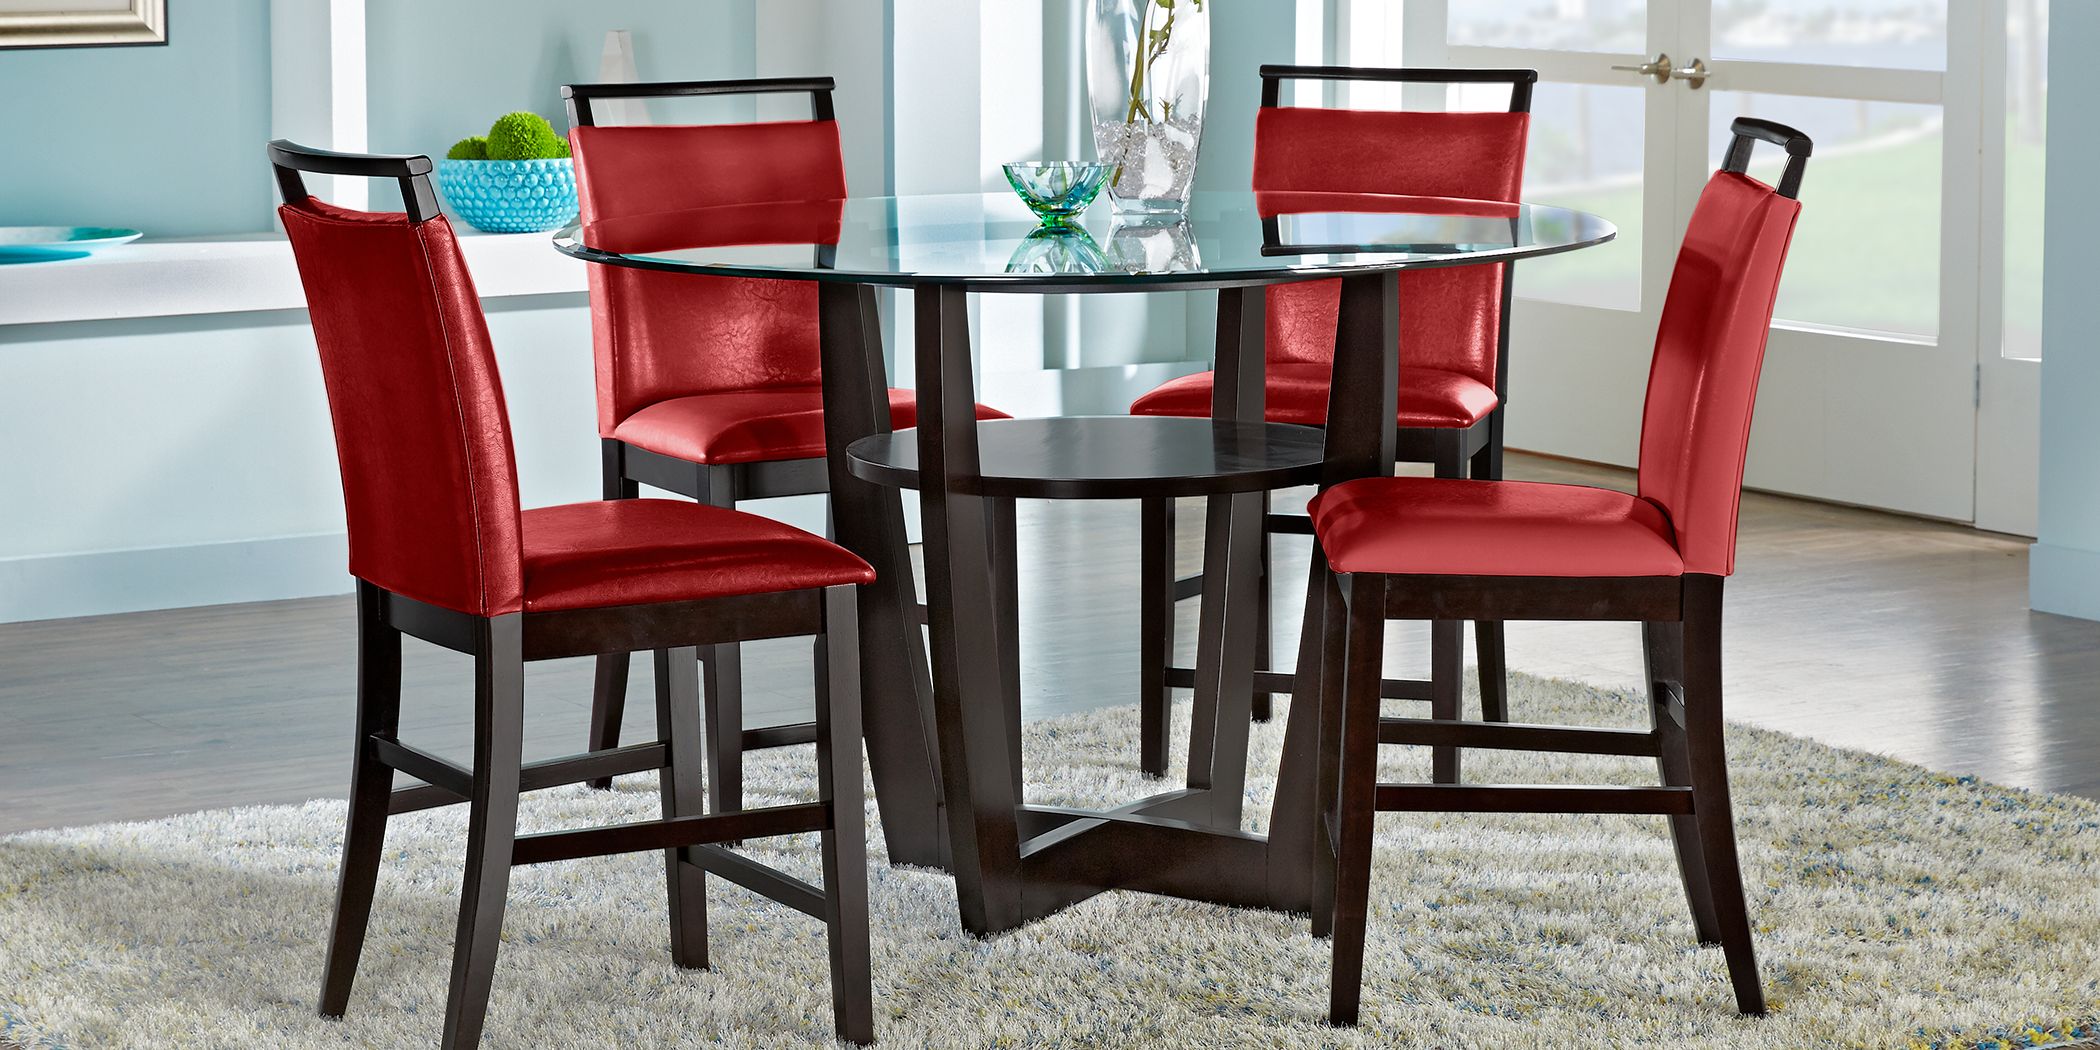 Red Dining Room Table Sets For, Glass Dining Table Red Chairs